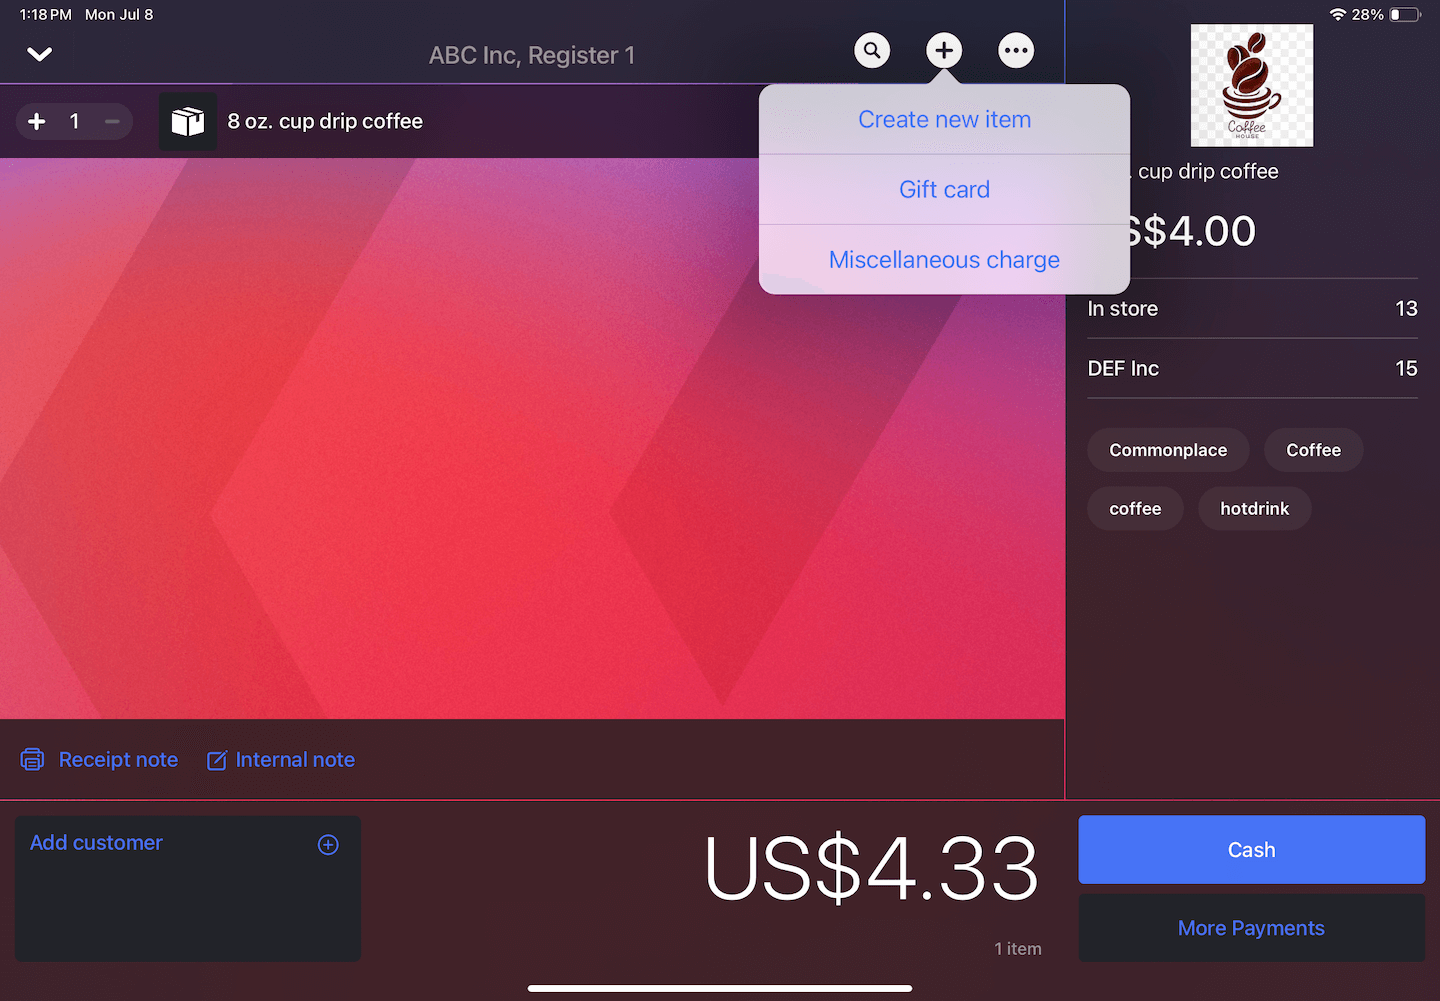 Sale screen with drop-down menu showing Create new item option.